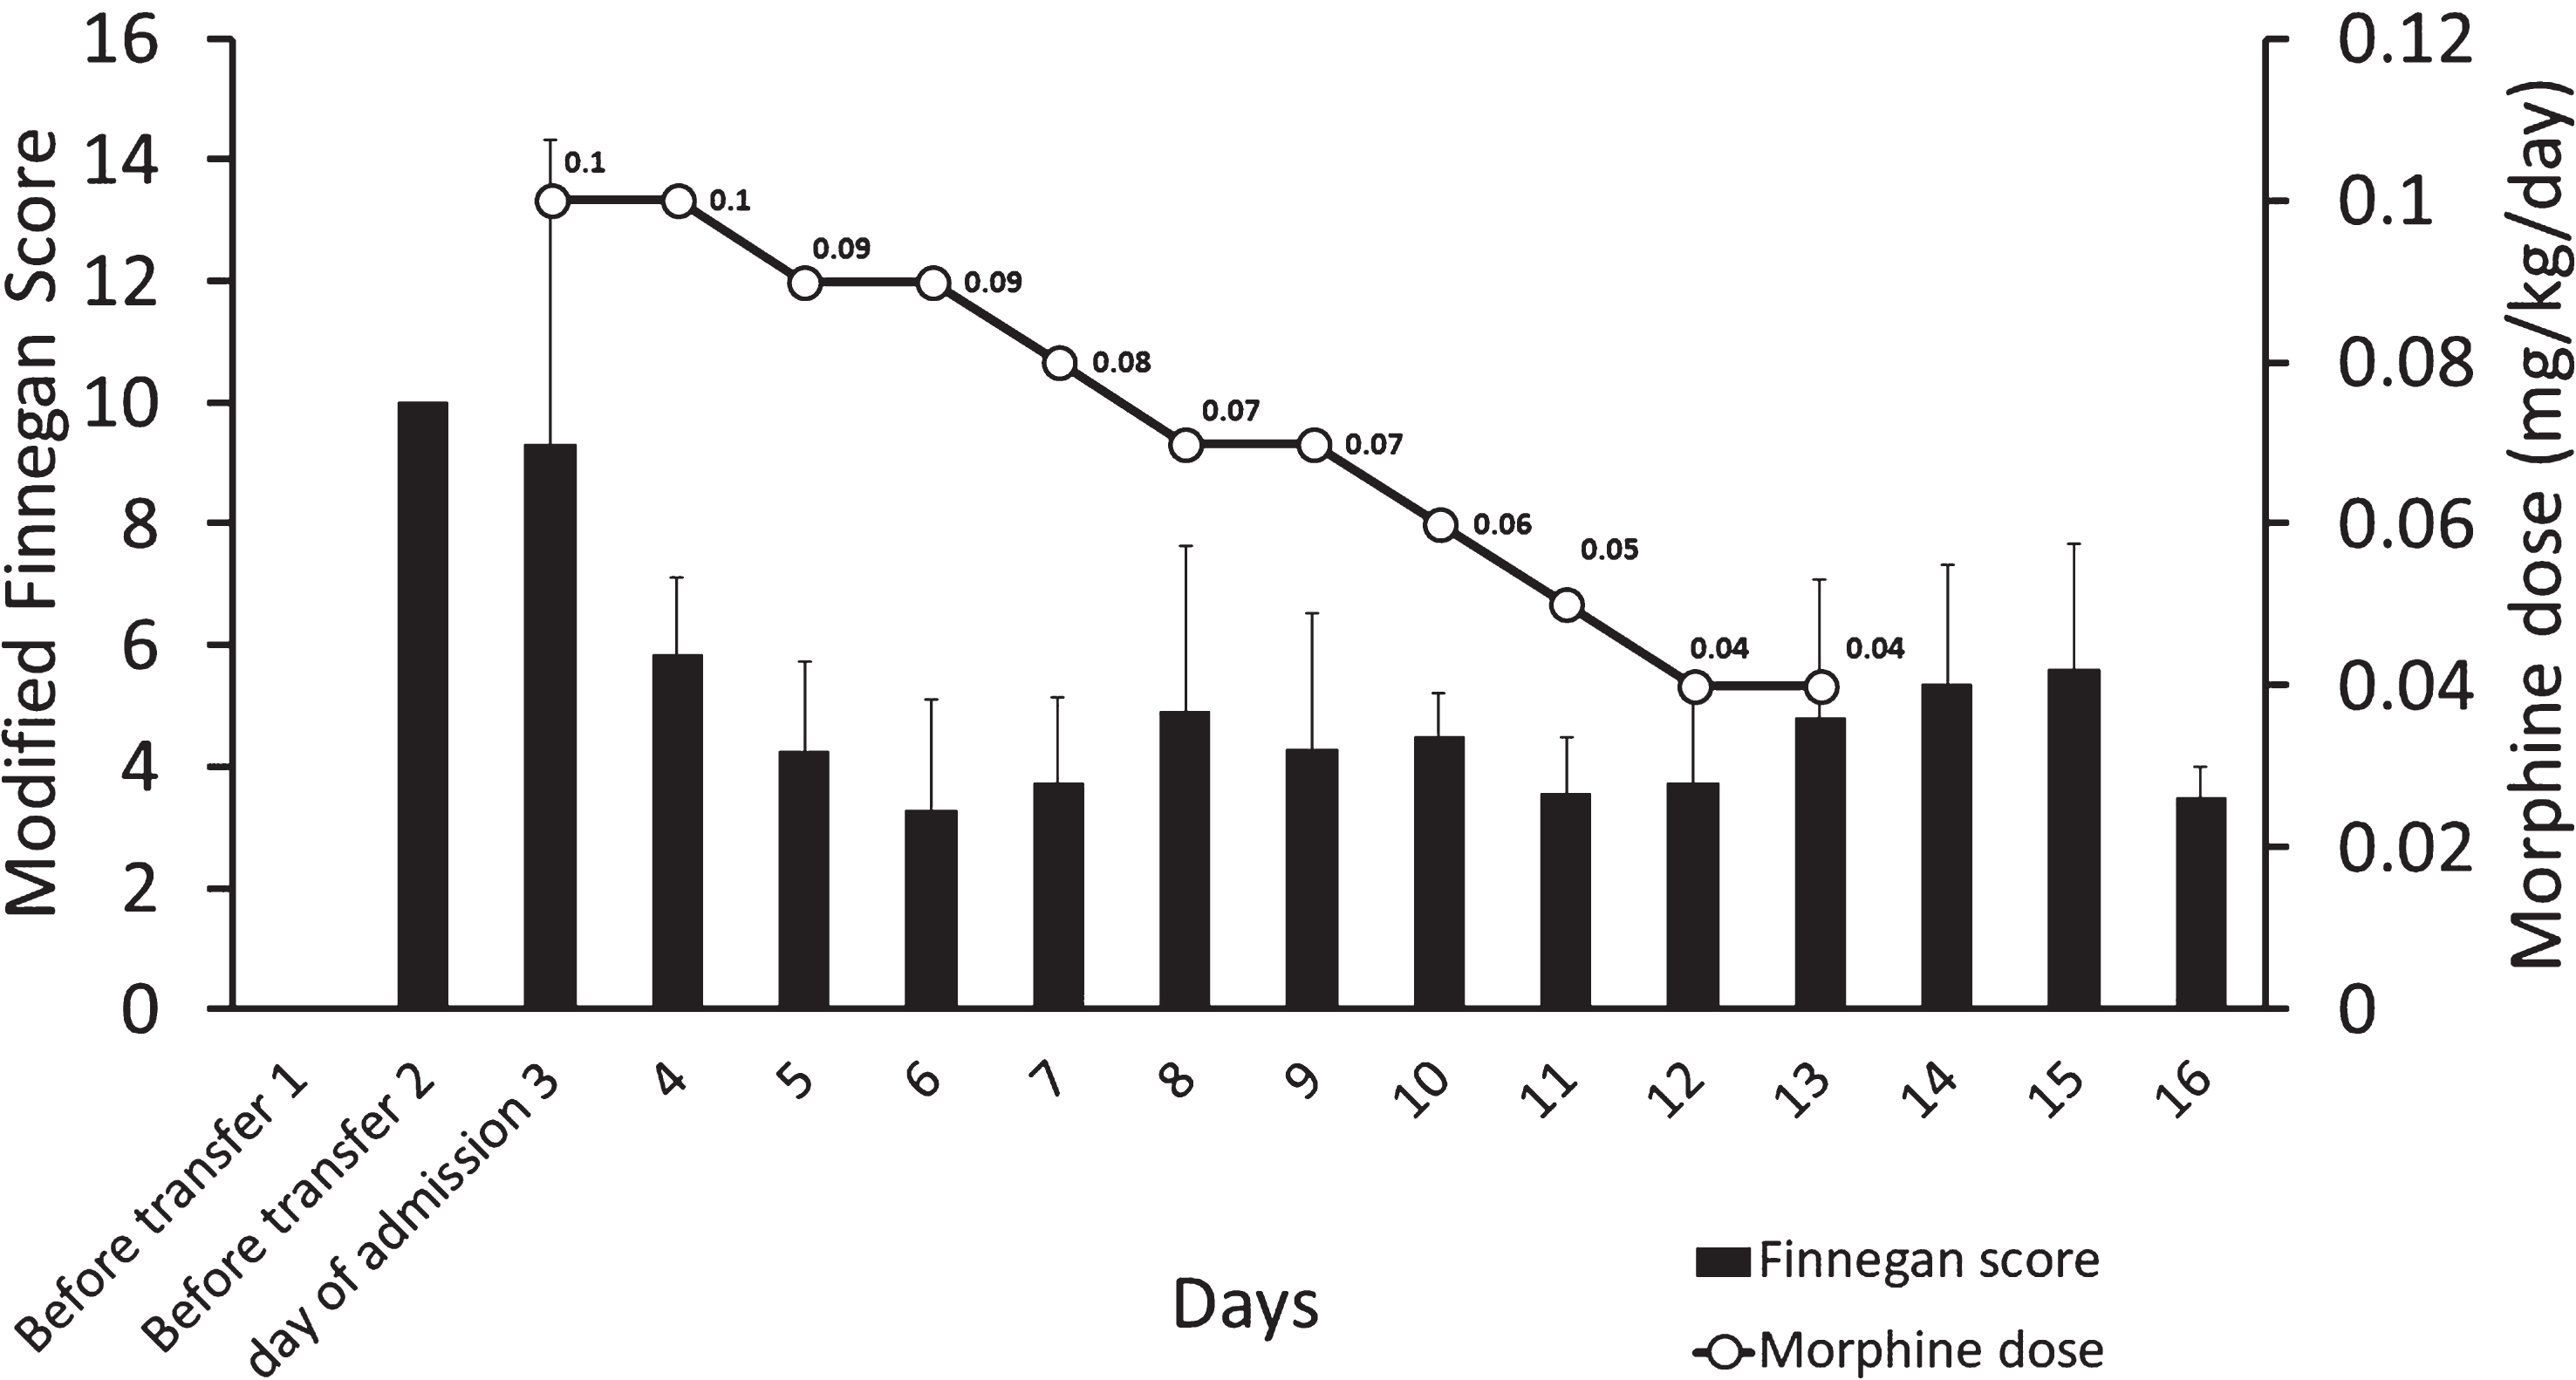 The figure shows the pharmacological management of the infant. X-axis shows the days, while y-axis shows the modified Finnegan scores (bar graph) and the secondary y-axis the dose of morphine (line graph).